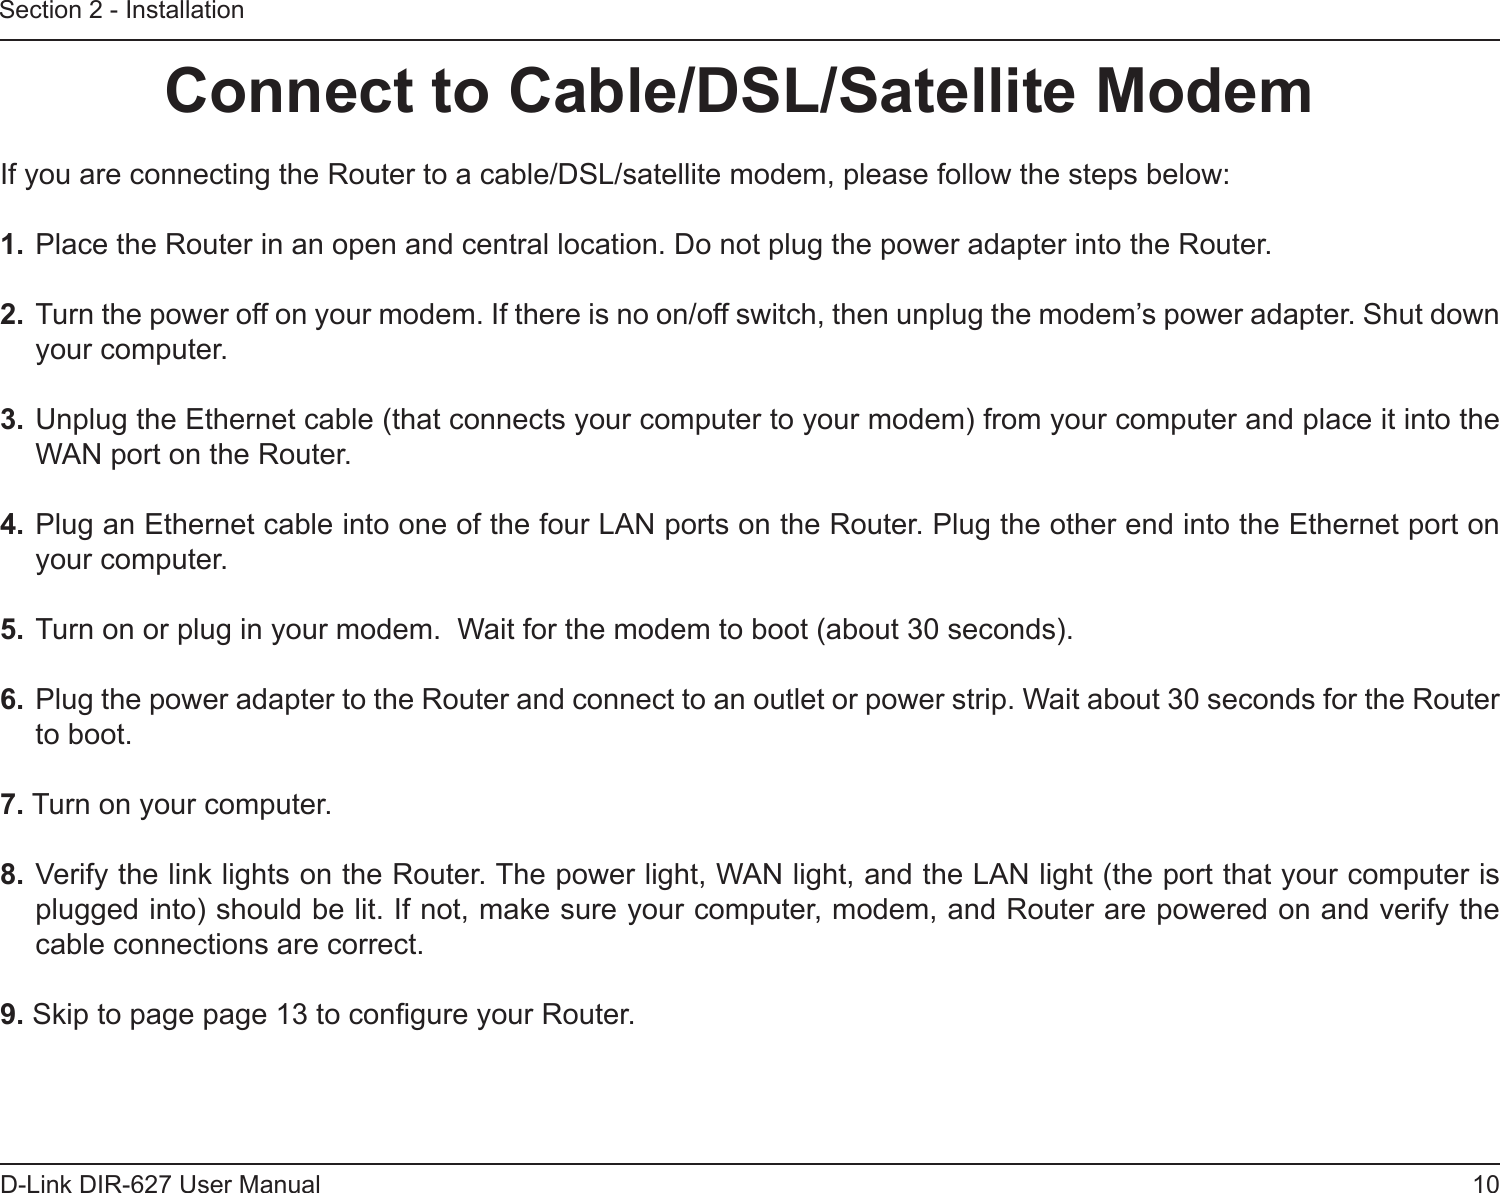 10D-Link DIR-627 User ManualSection 2 - InstallationIf you are connecting the Router to a cable/DSL/satellite modem, please follow the steps below:1. Place the Router in an open and central location. Do not plug the power adapter into the Router. 2. Turn the power off on your modem. If there is no on/off switch, then unplug the modem’s power adapter. Shut down your computer.3. Unplug the Ethernet cable (that connects your computer to your modem) from your computer and place it into the WAN port on the Router.  4. Plug an Ethernet cable into one of the four LAN ports on the Router. Plug the other end into the Ethernet port on your computer.5. Turn on or plug in your modem.  Wait for the modem to boot (about 30 seconds). 6. Plug the power adapter to the Router and connect to an outlet or power strip. Wait about 30 seconds for the Router to boot. 7. Turn on your computer. 8. Verify the link lights on the Router. The power light, WAN light, and the LAN light (the port that your computer is plugged into) should be lit. If not, make sure your computer, modem, and Router are powered on and verify the cable connections are correct. 9. Skip to page page 13 to congure your Router. ConnecttoCable/DSL/SatelliteModem